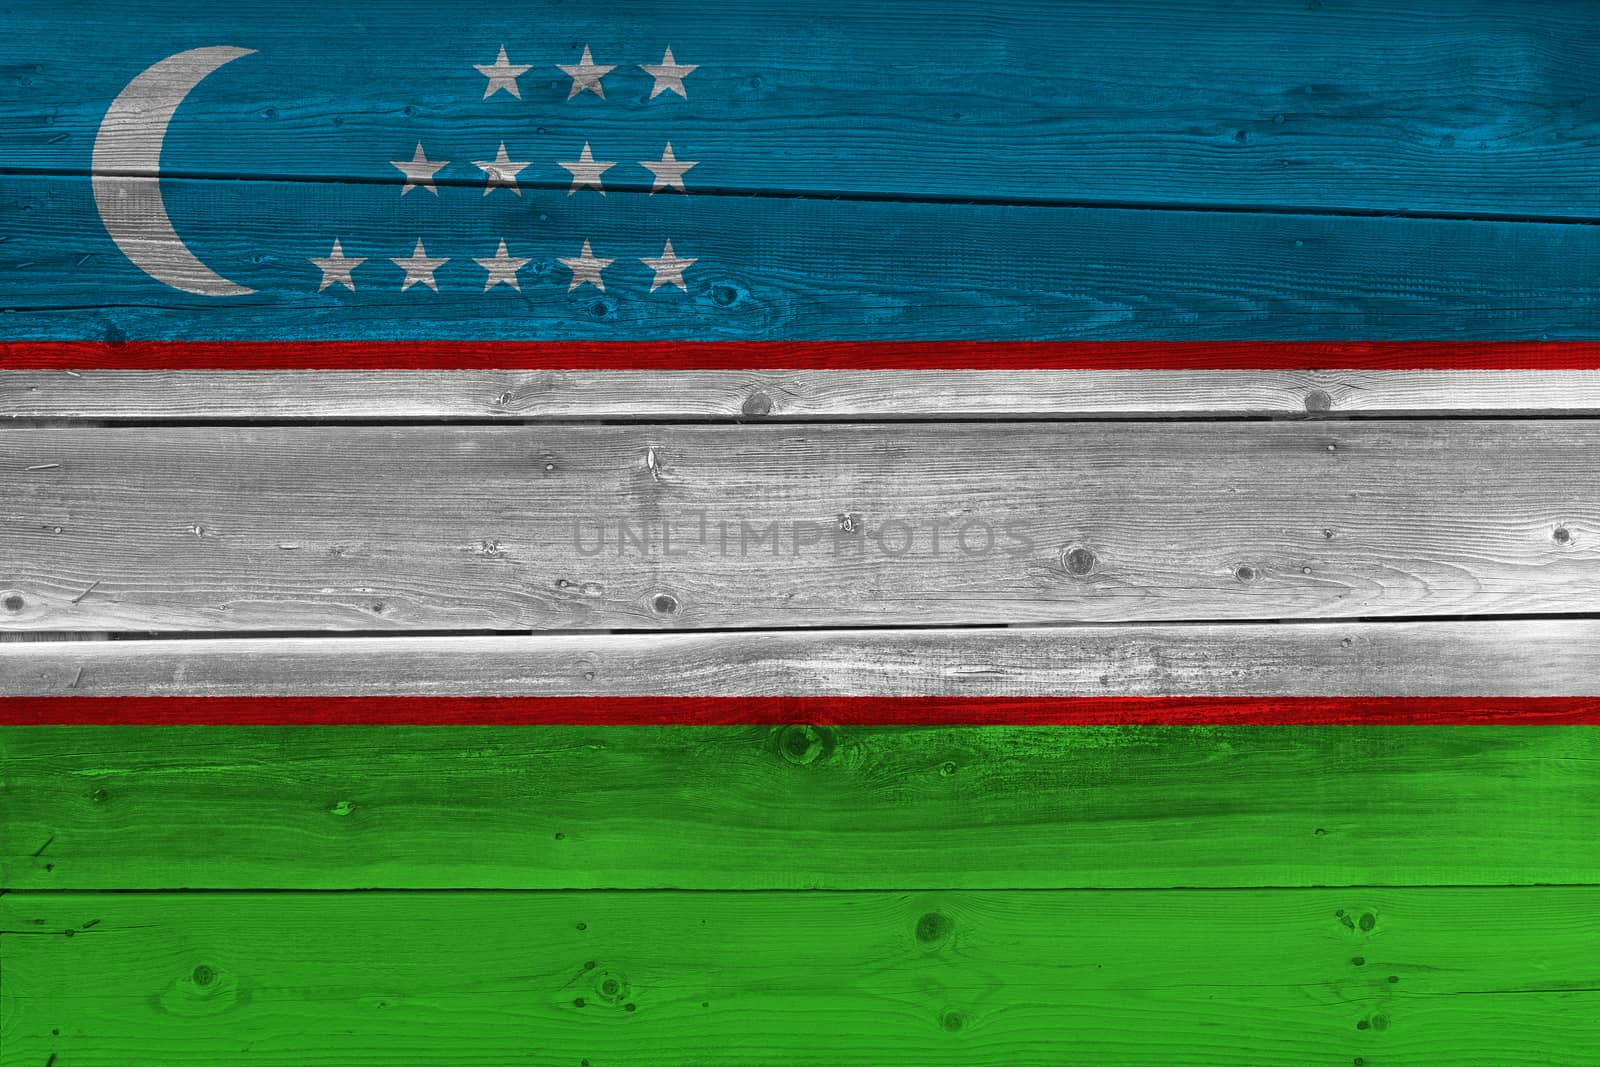 Uzbekistan flag painted on old wood plank by Visual-Content